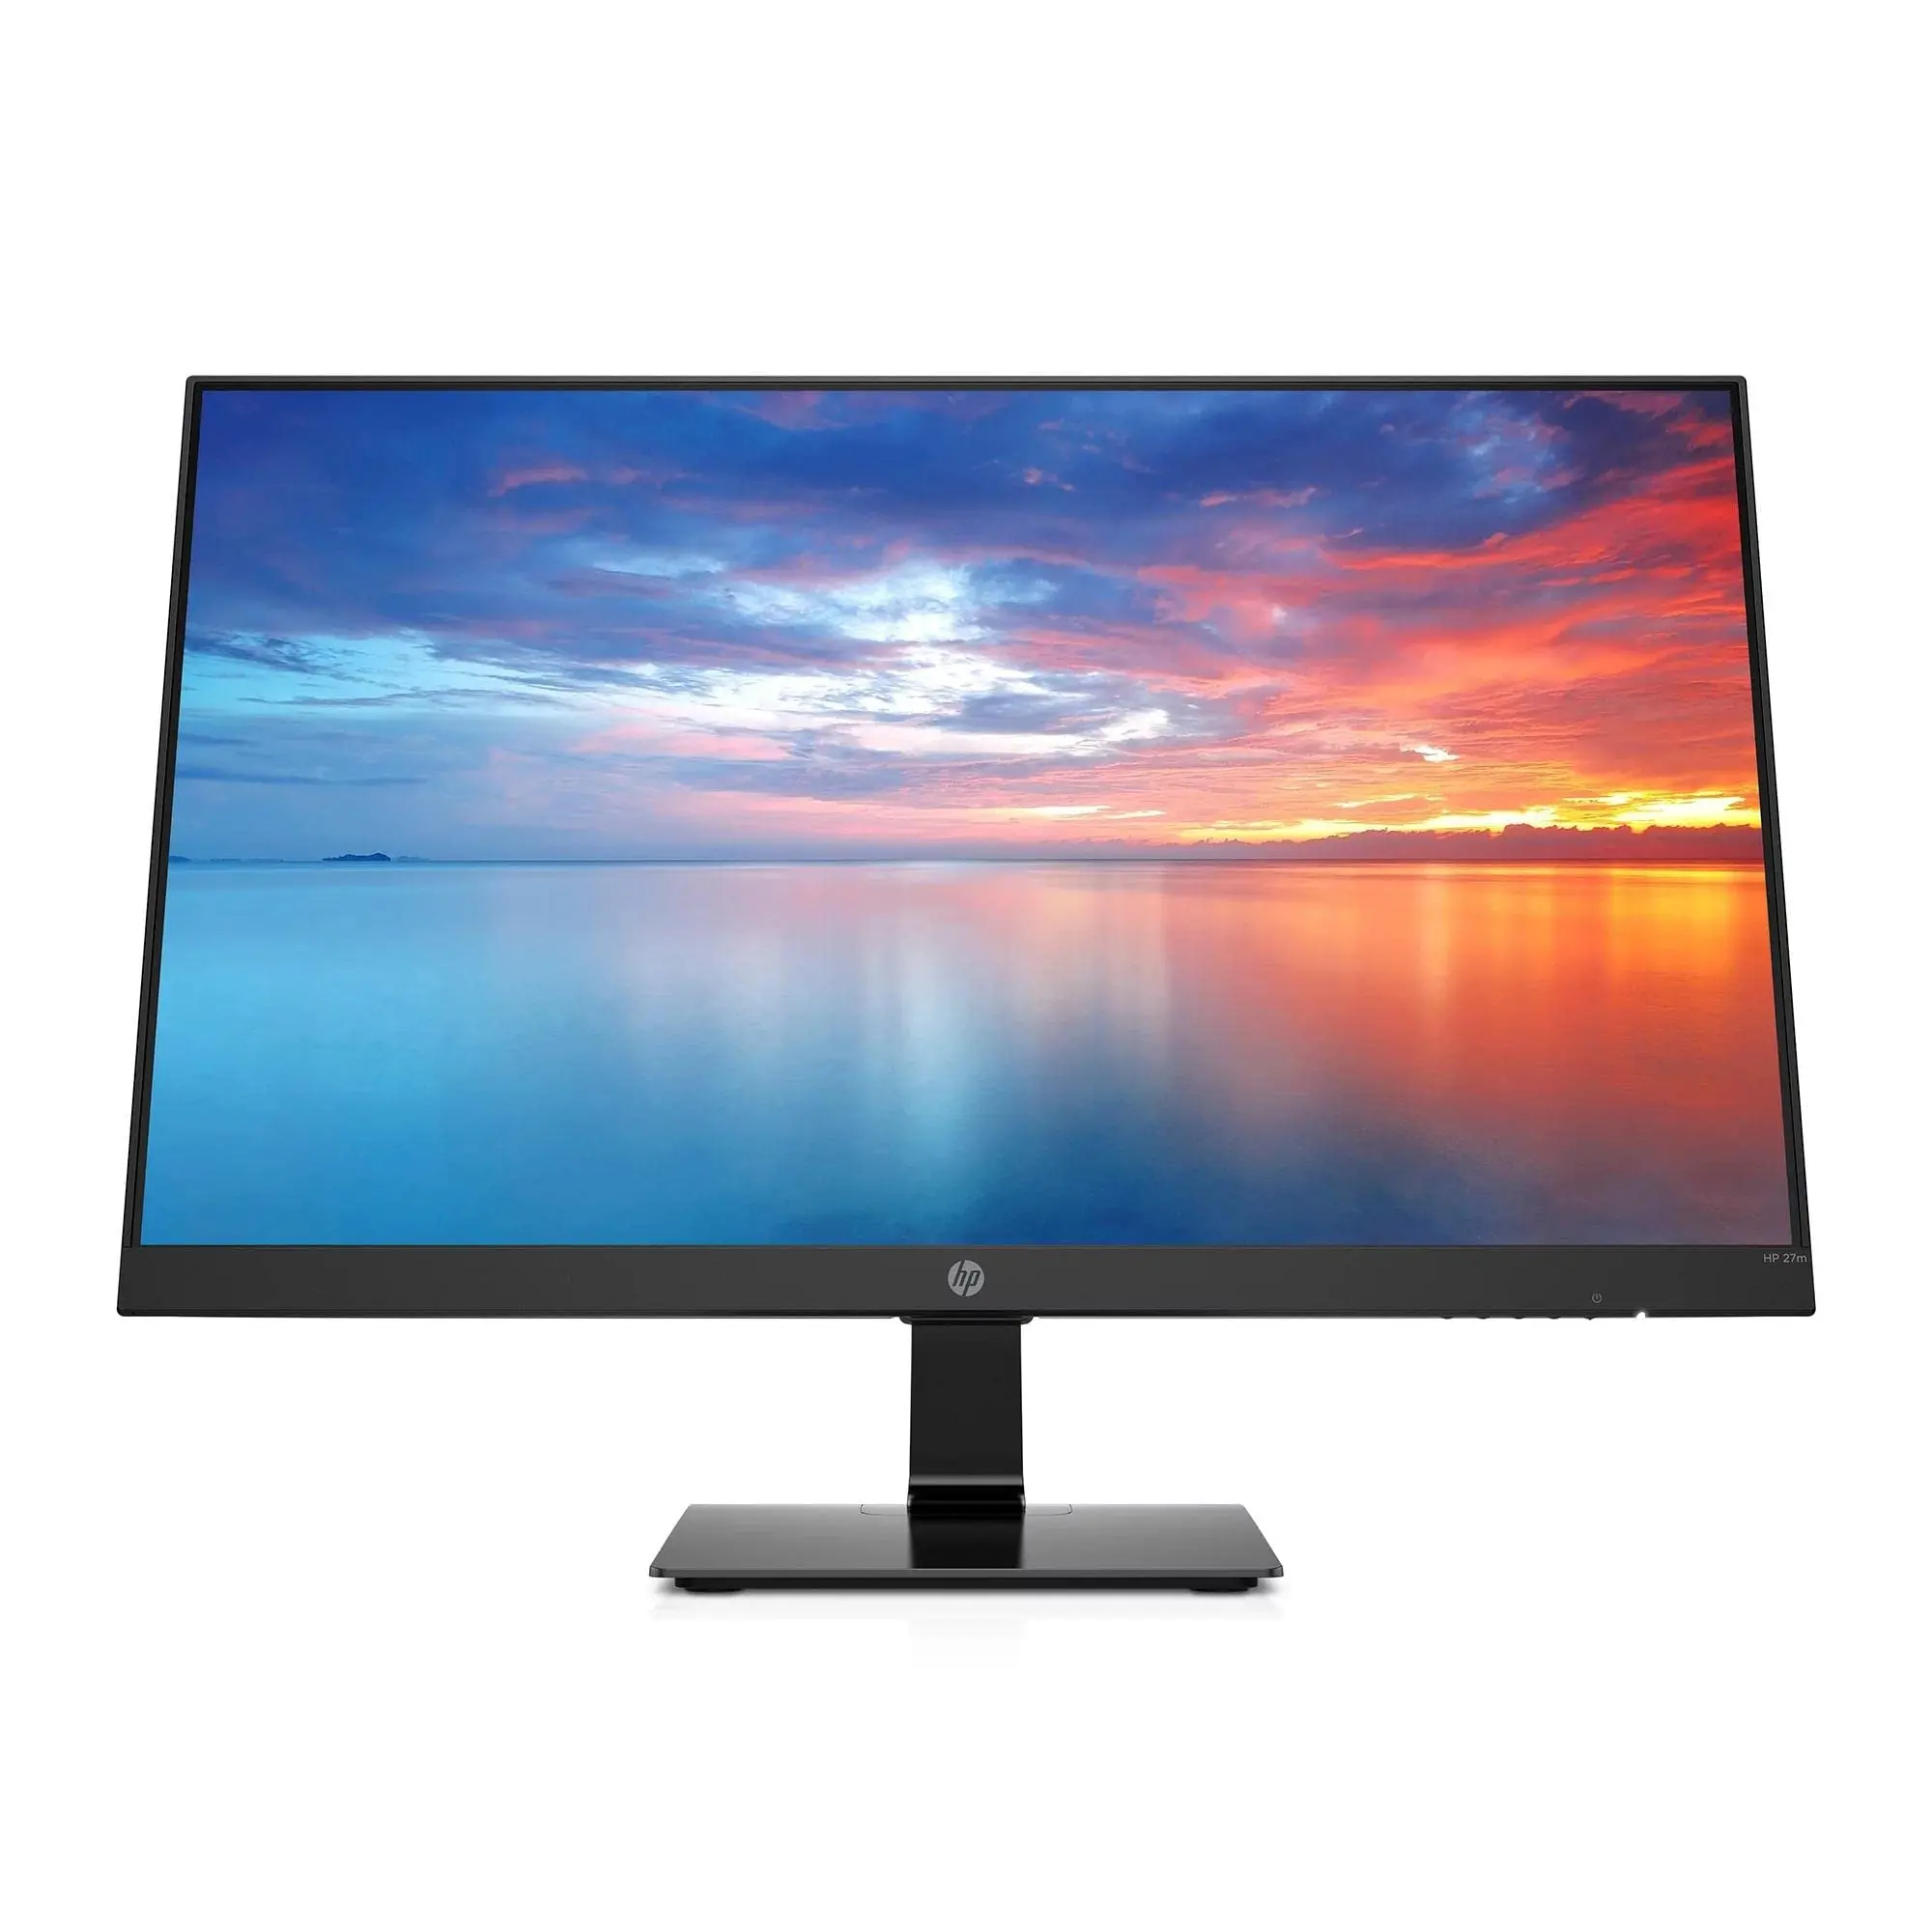 Hewlett packard hp 27m 27-inch monitor: features, specs, and connectivity